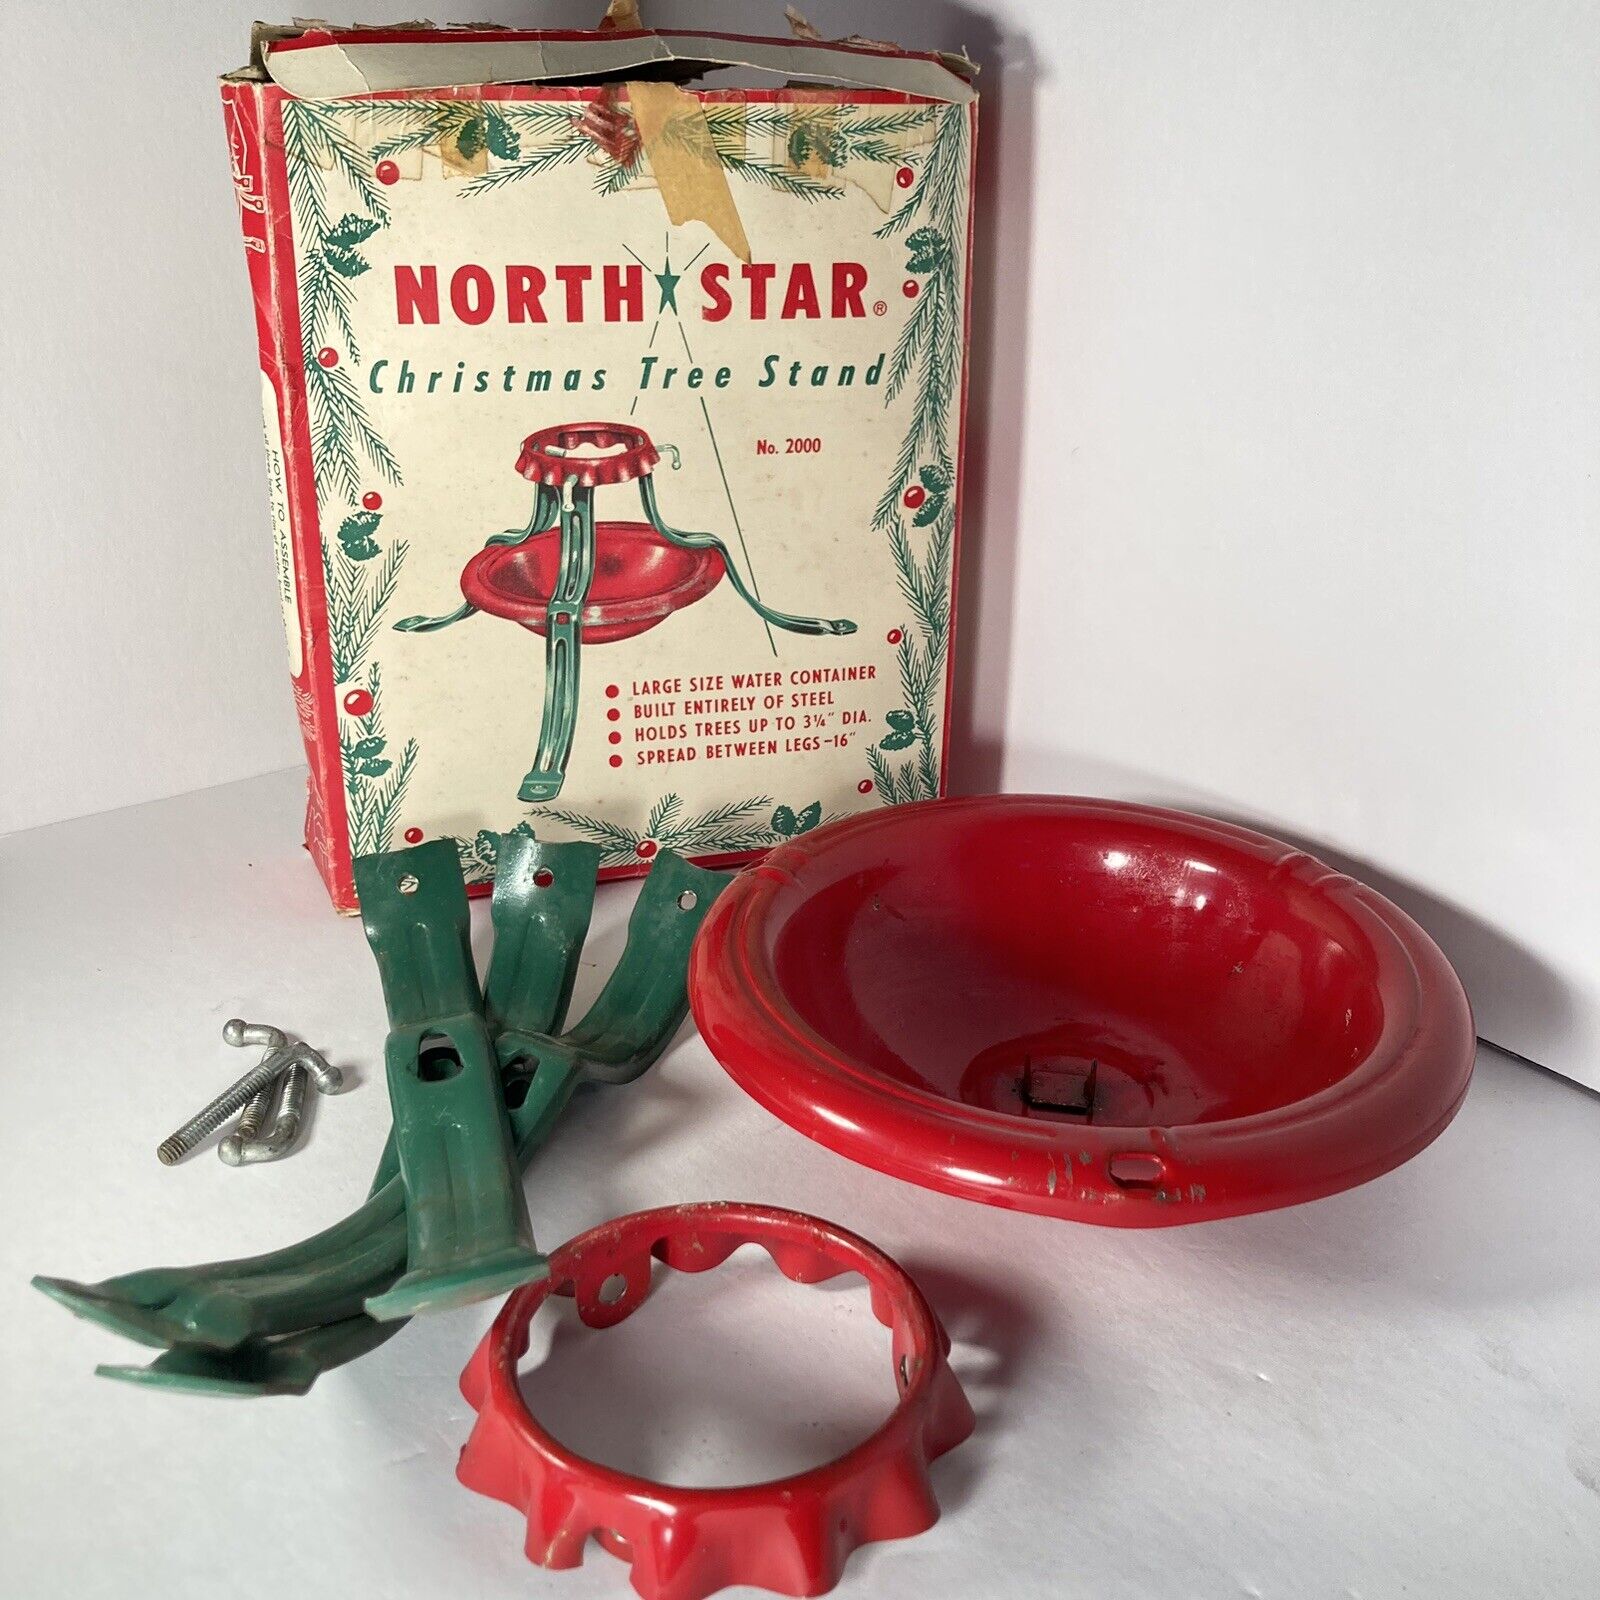 Vintage North Star Christmas Tree Stand Complete Set No 2000